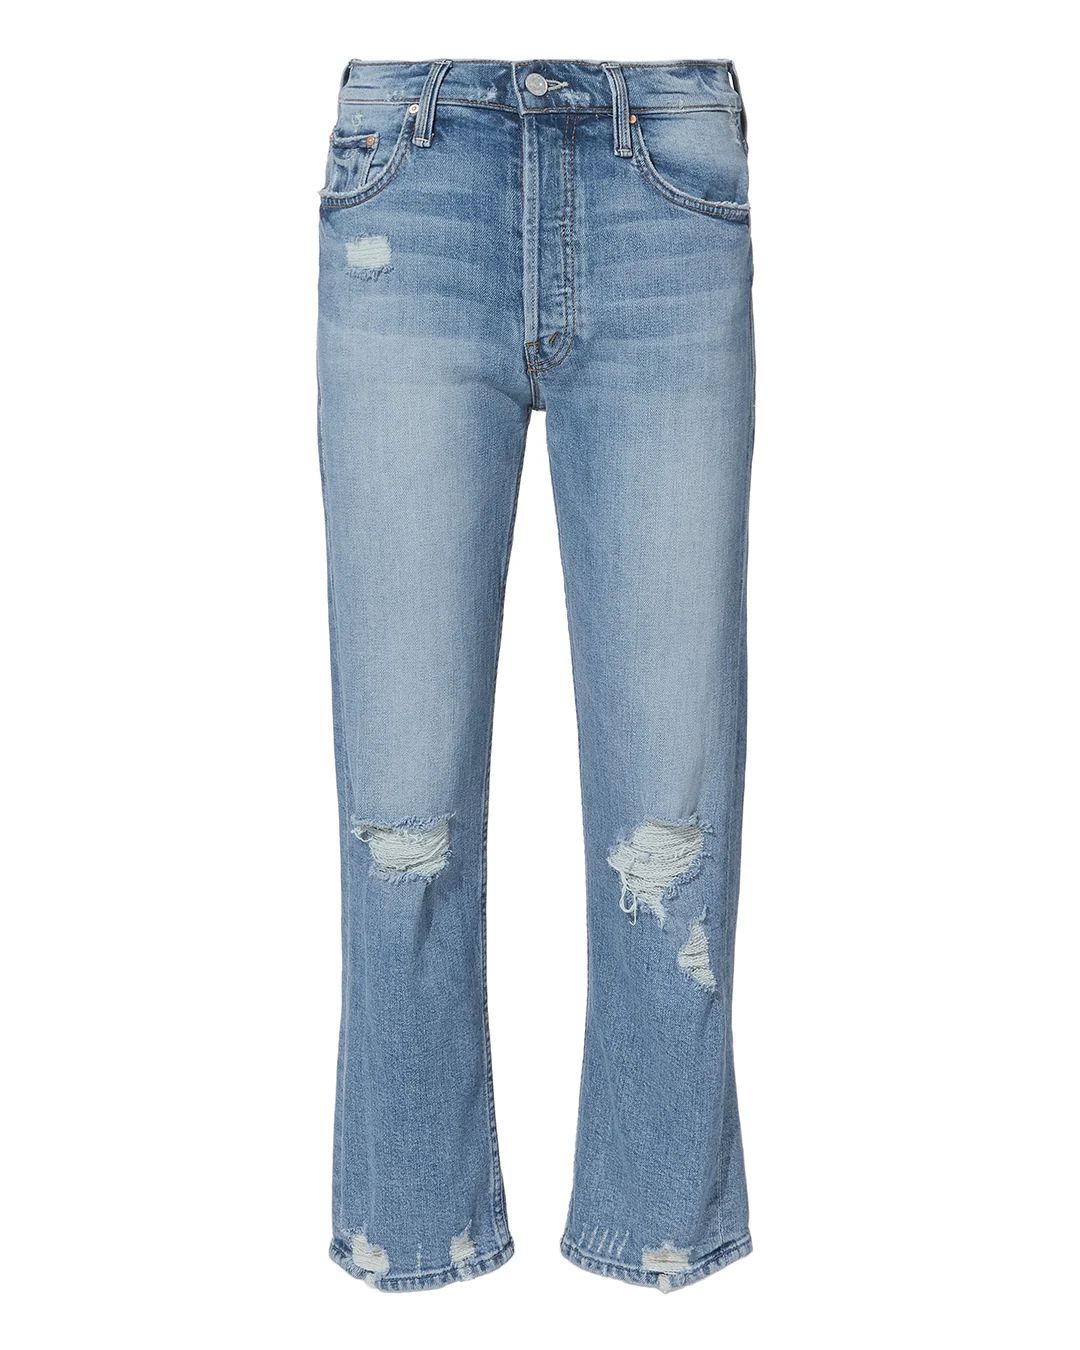 Tomcat Distressed Cropped Jeans | INTERMIX